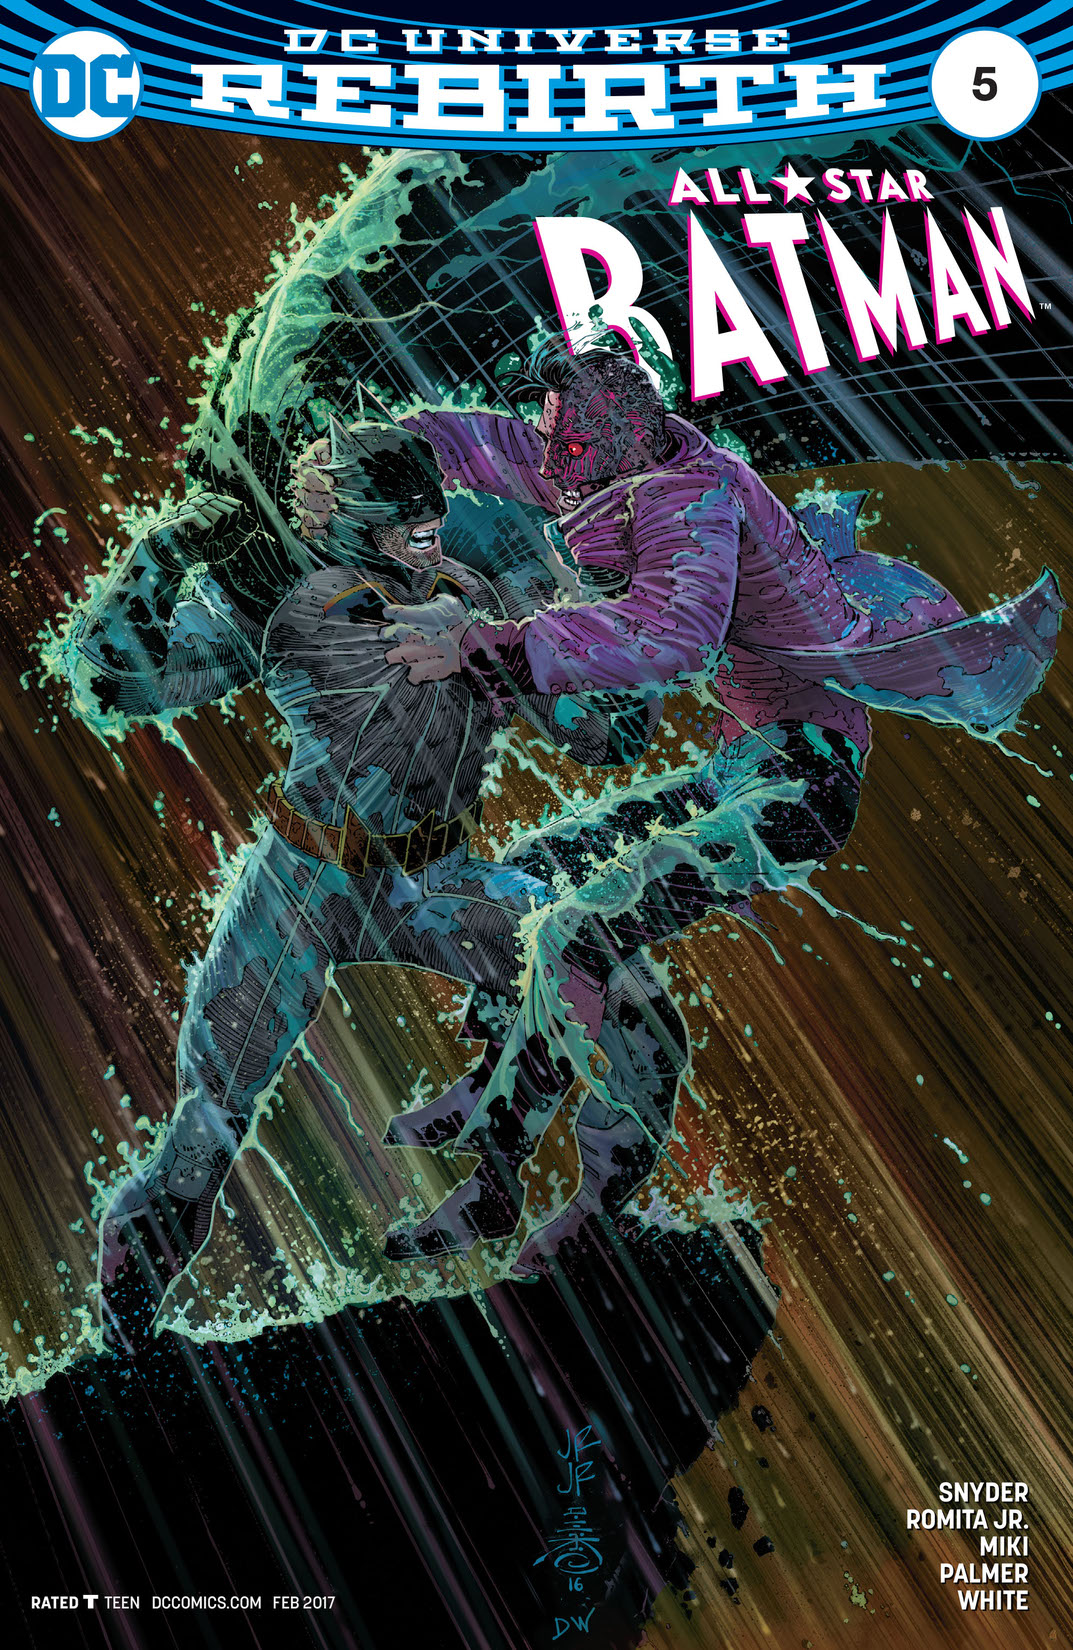 All Star Batman #5 preview images